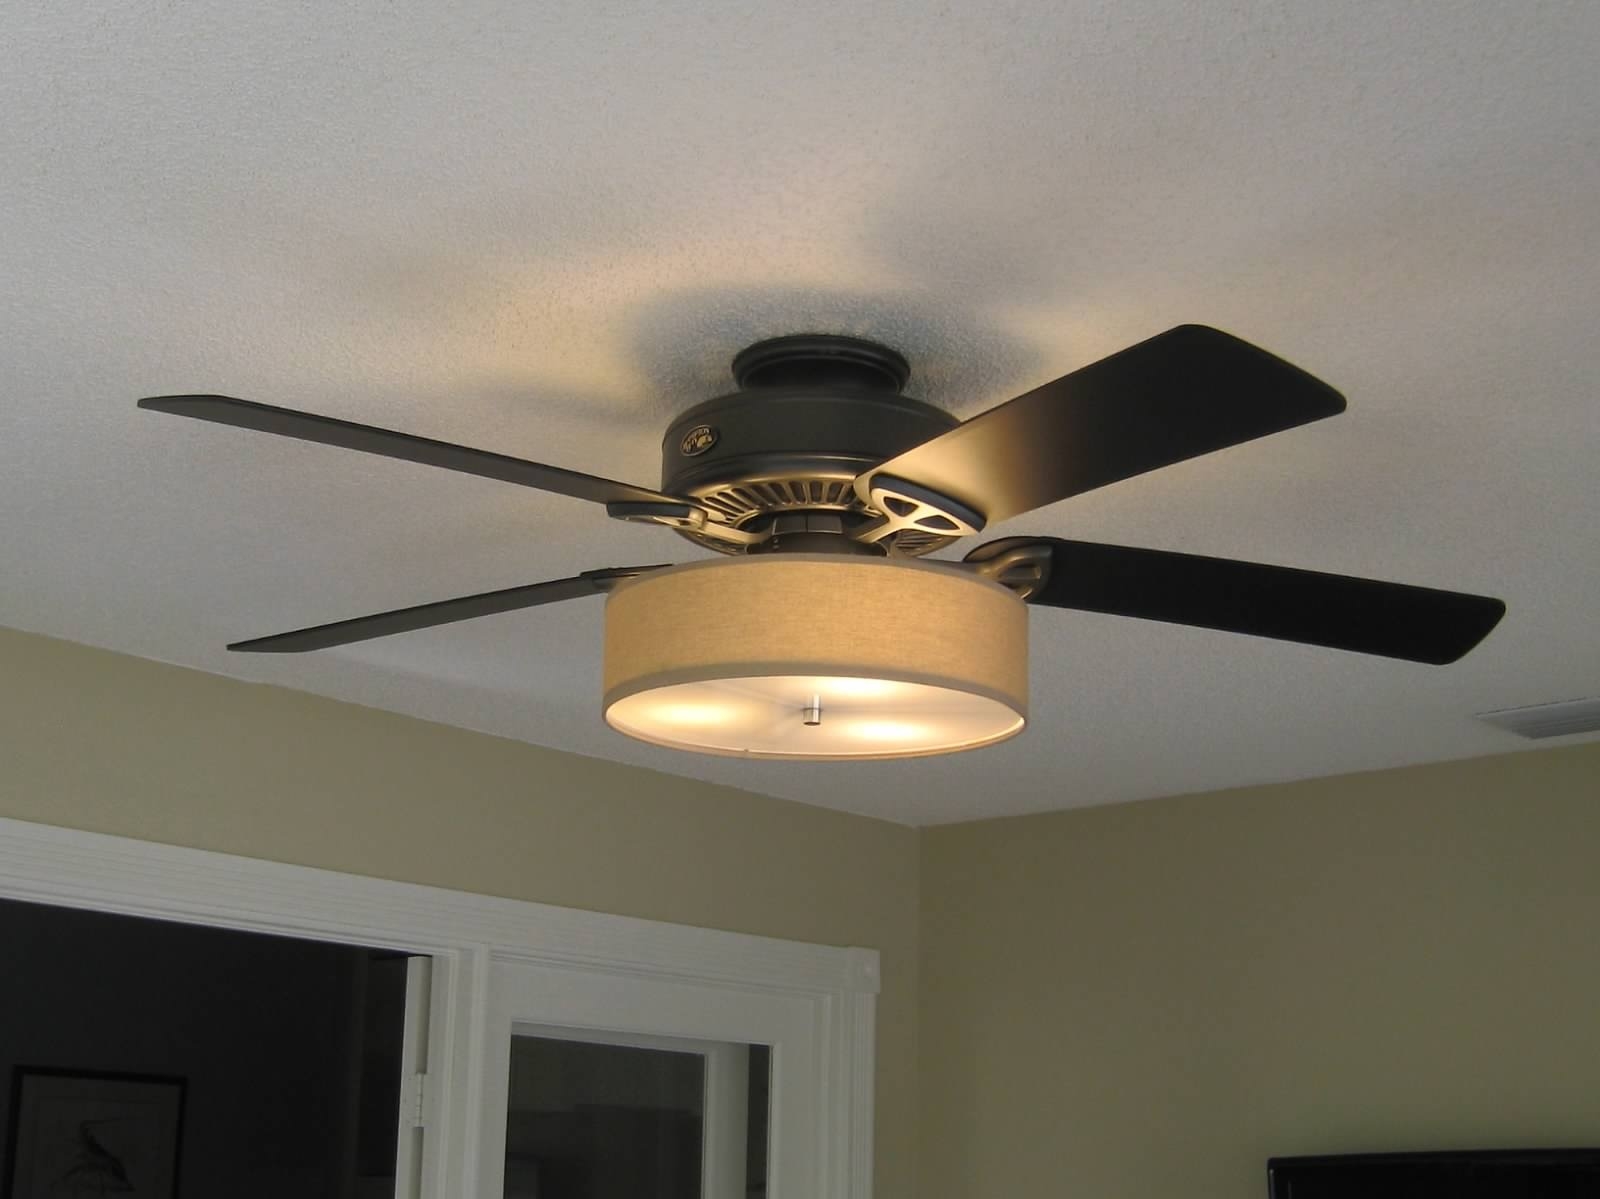 Permalink to Low Ceiling Fans With Lights